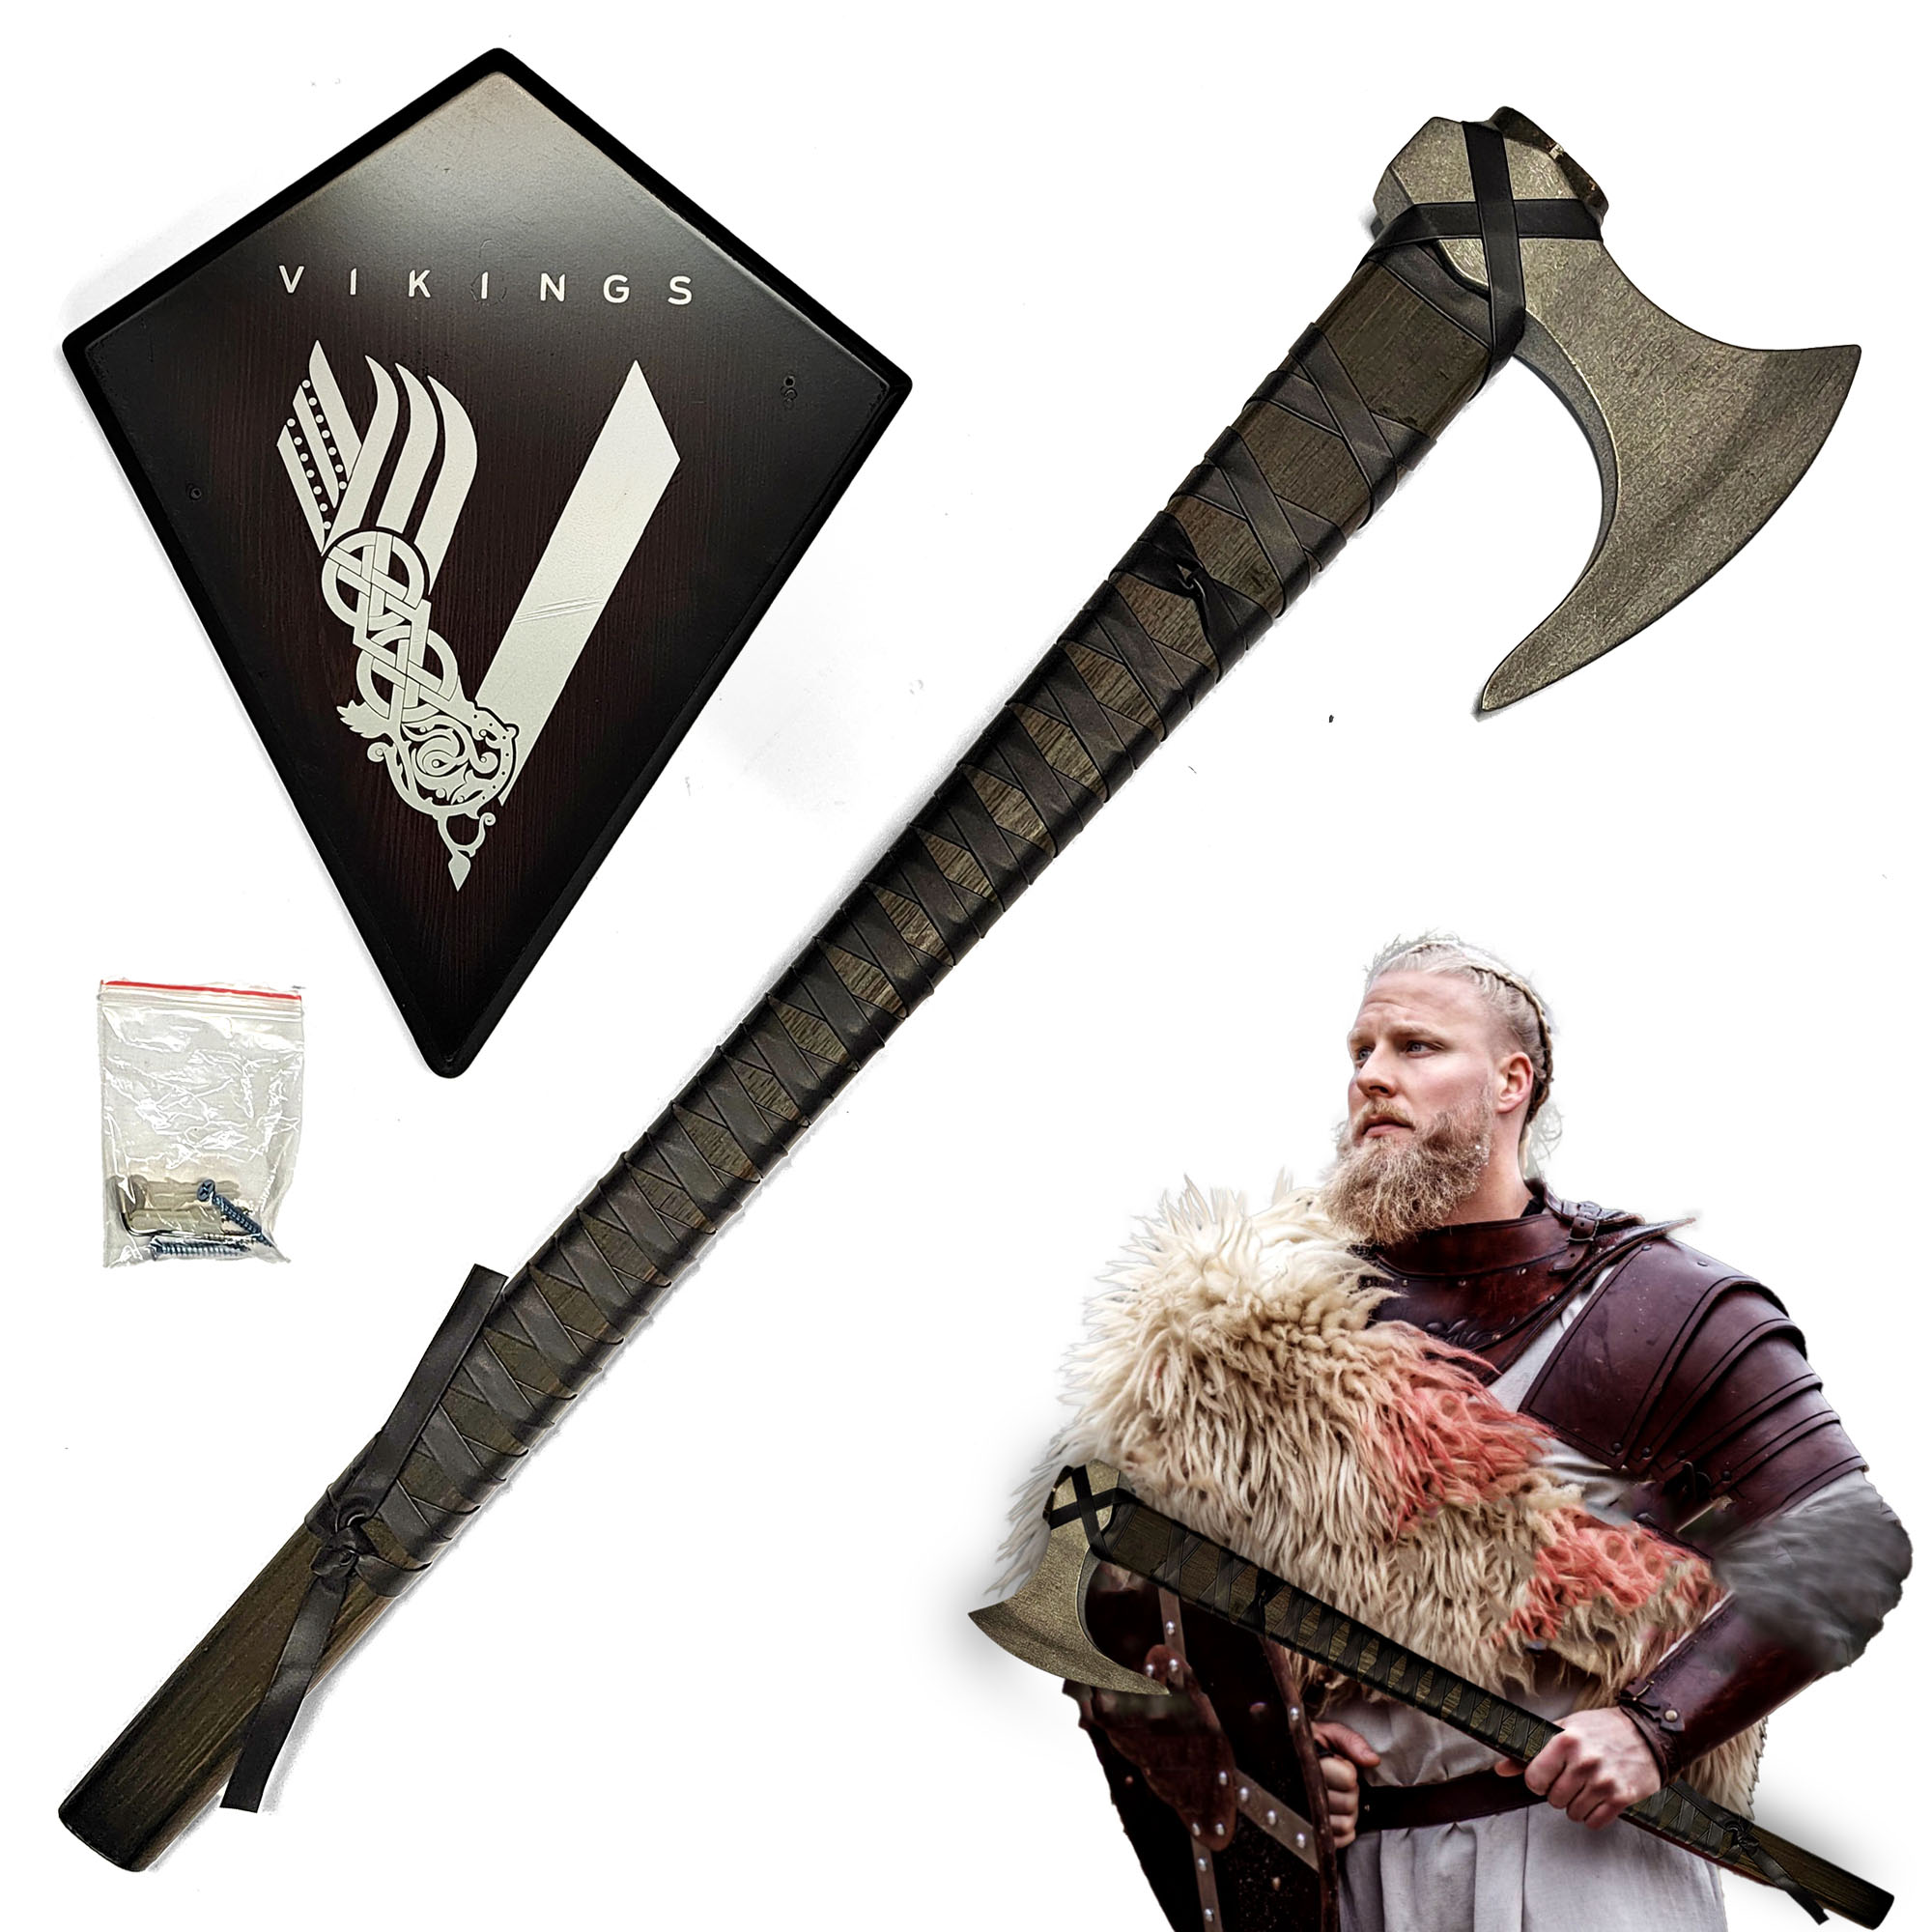 Vikings - Ragnar's axe with wall plaque